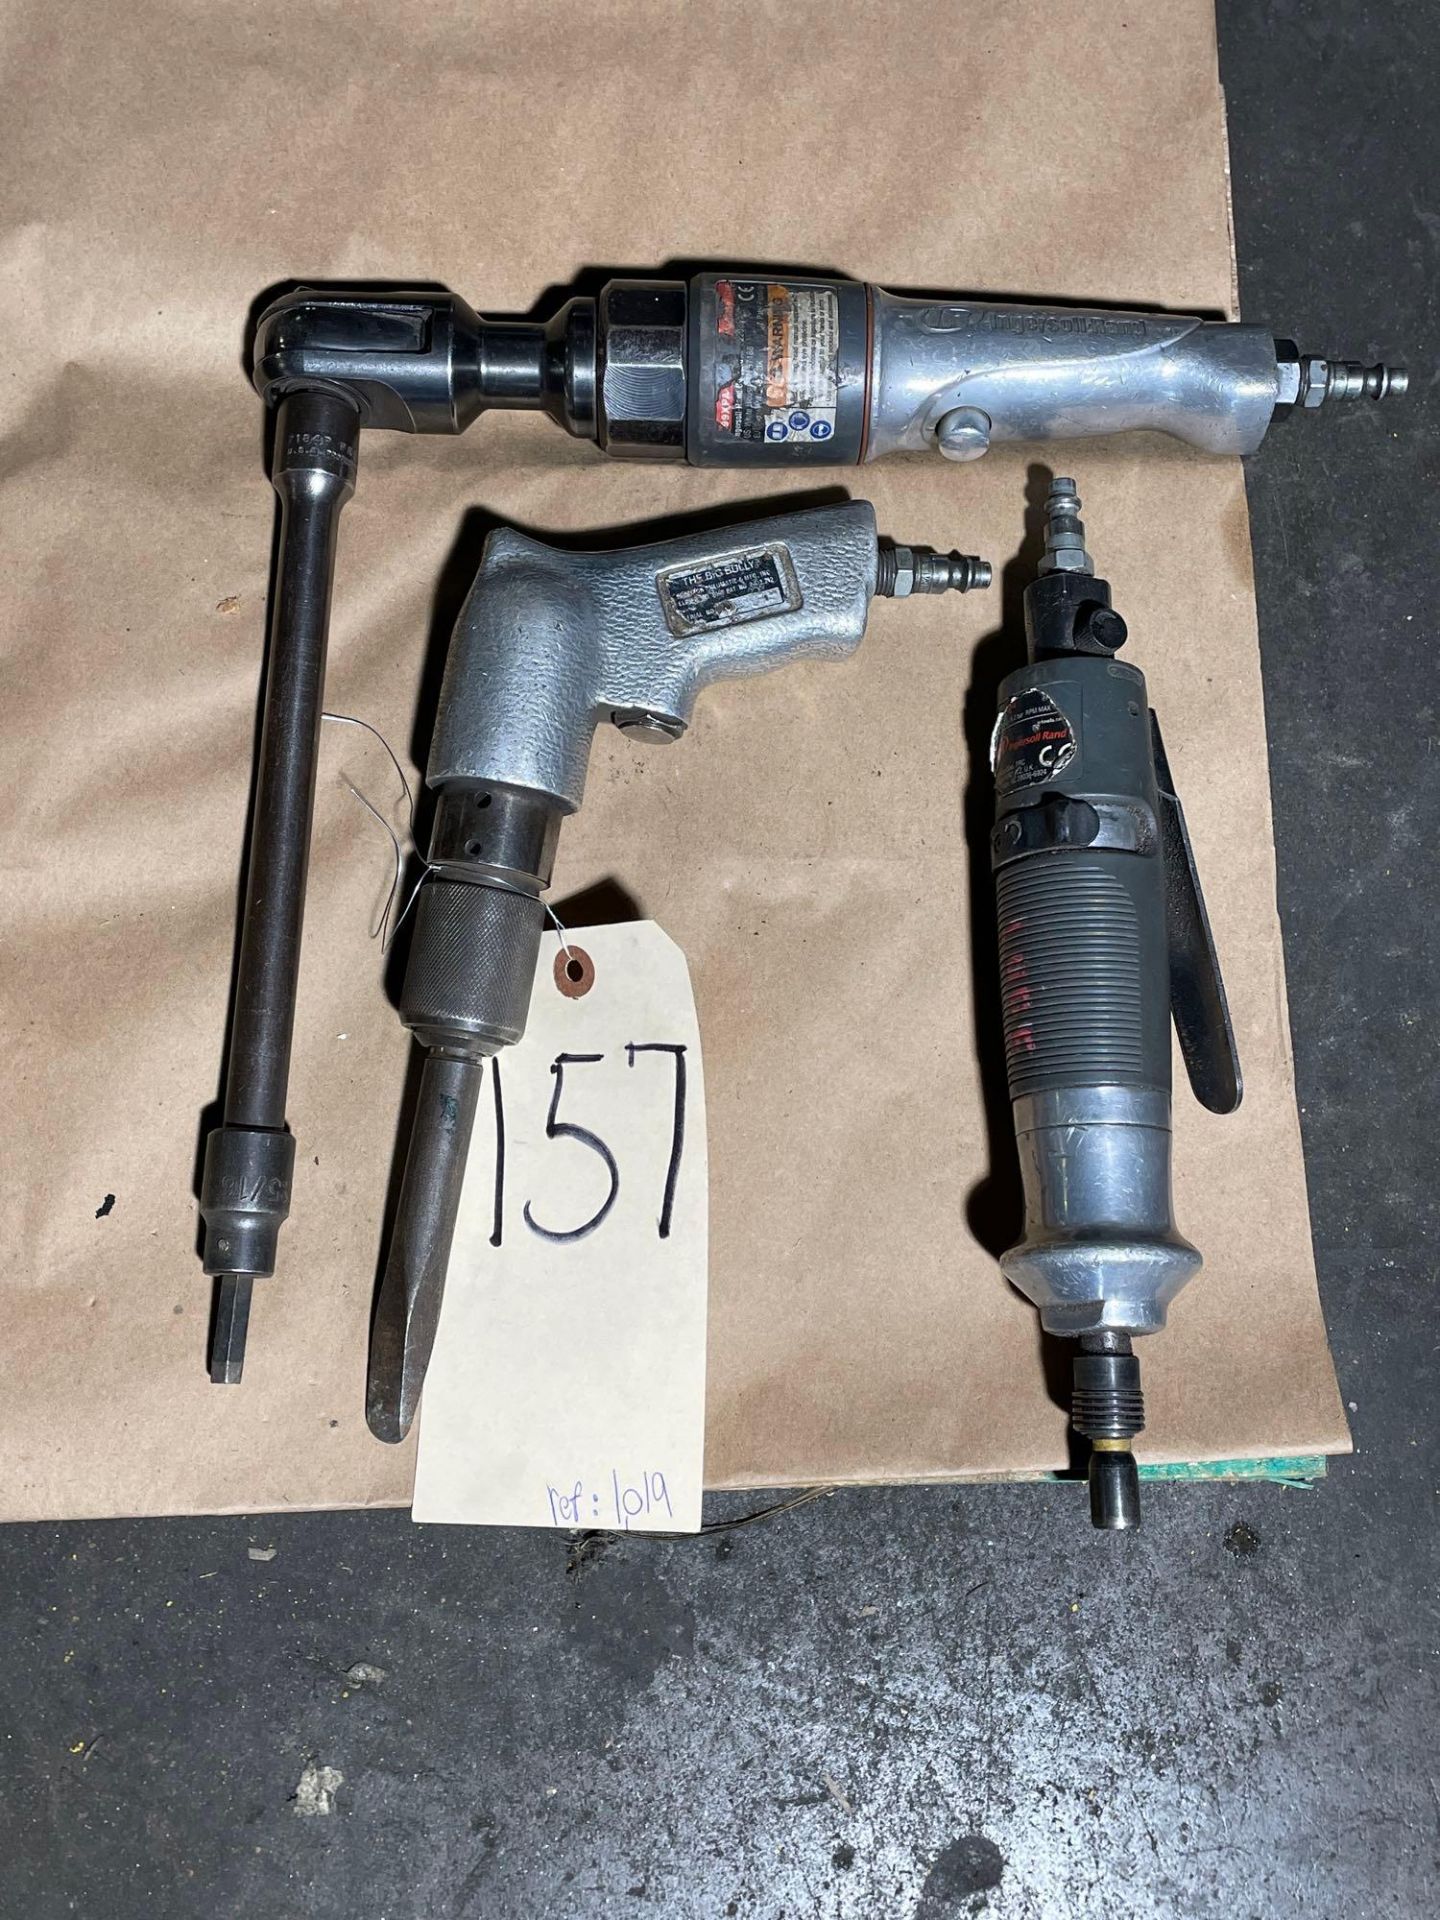 Lot of 3: (1) Ingersoll-Rand 1/2" Super Duty Ratchet Wrench, (1) Superior Pneumatic Air hammer